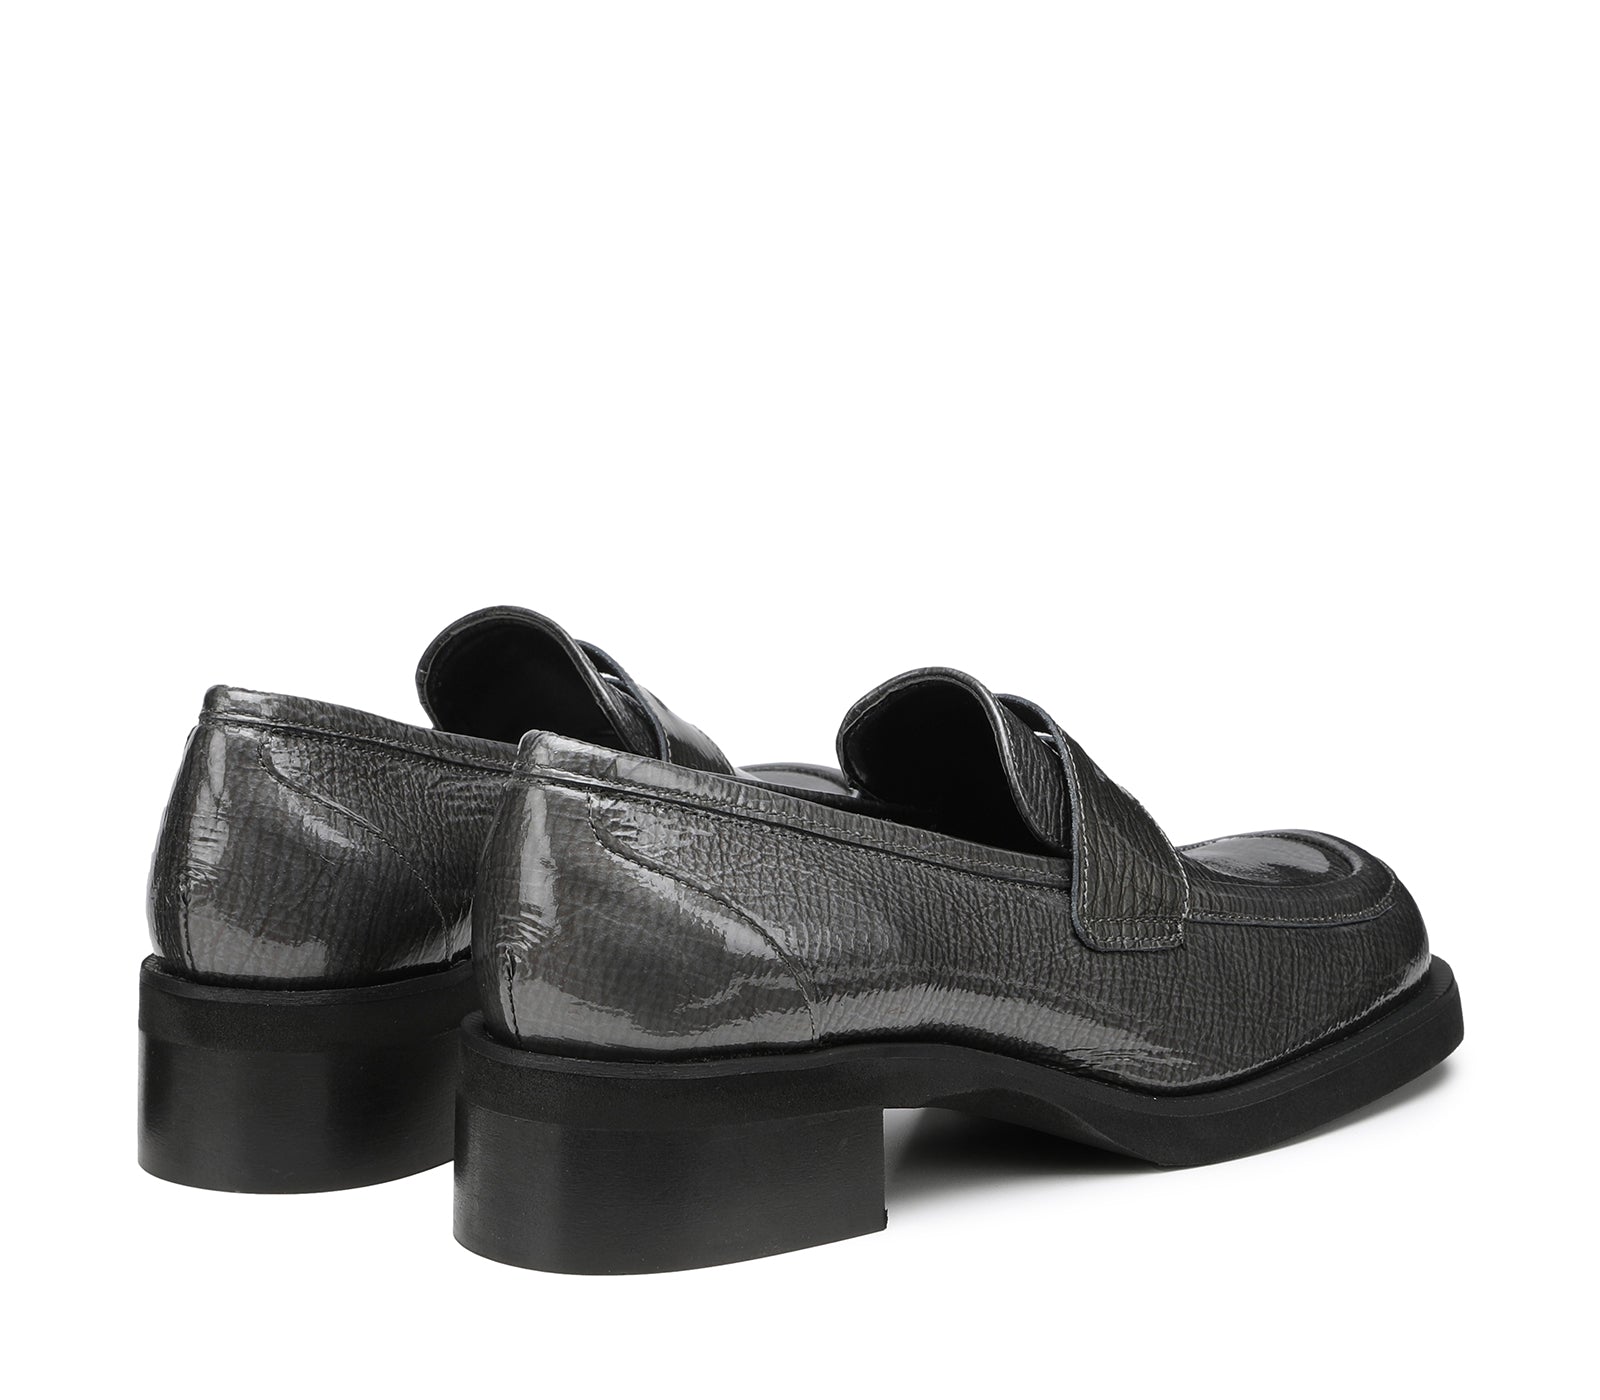 Women's Moccasins in Gray Patent Leather with Square Toe and Rubber Sole